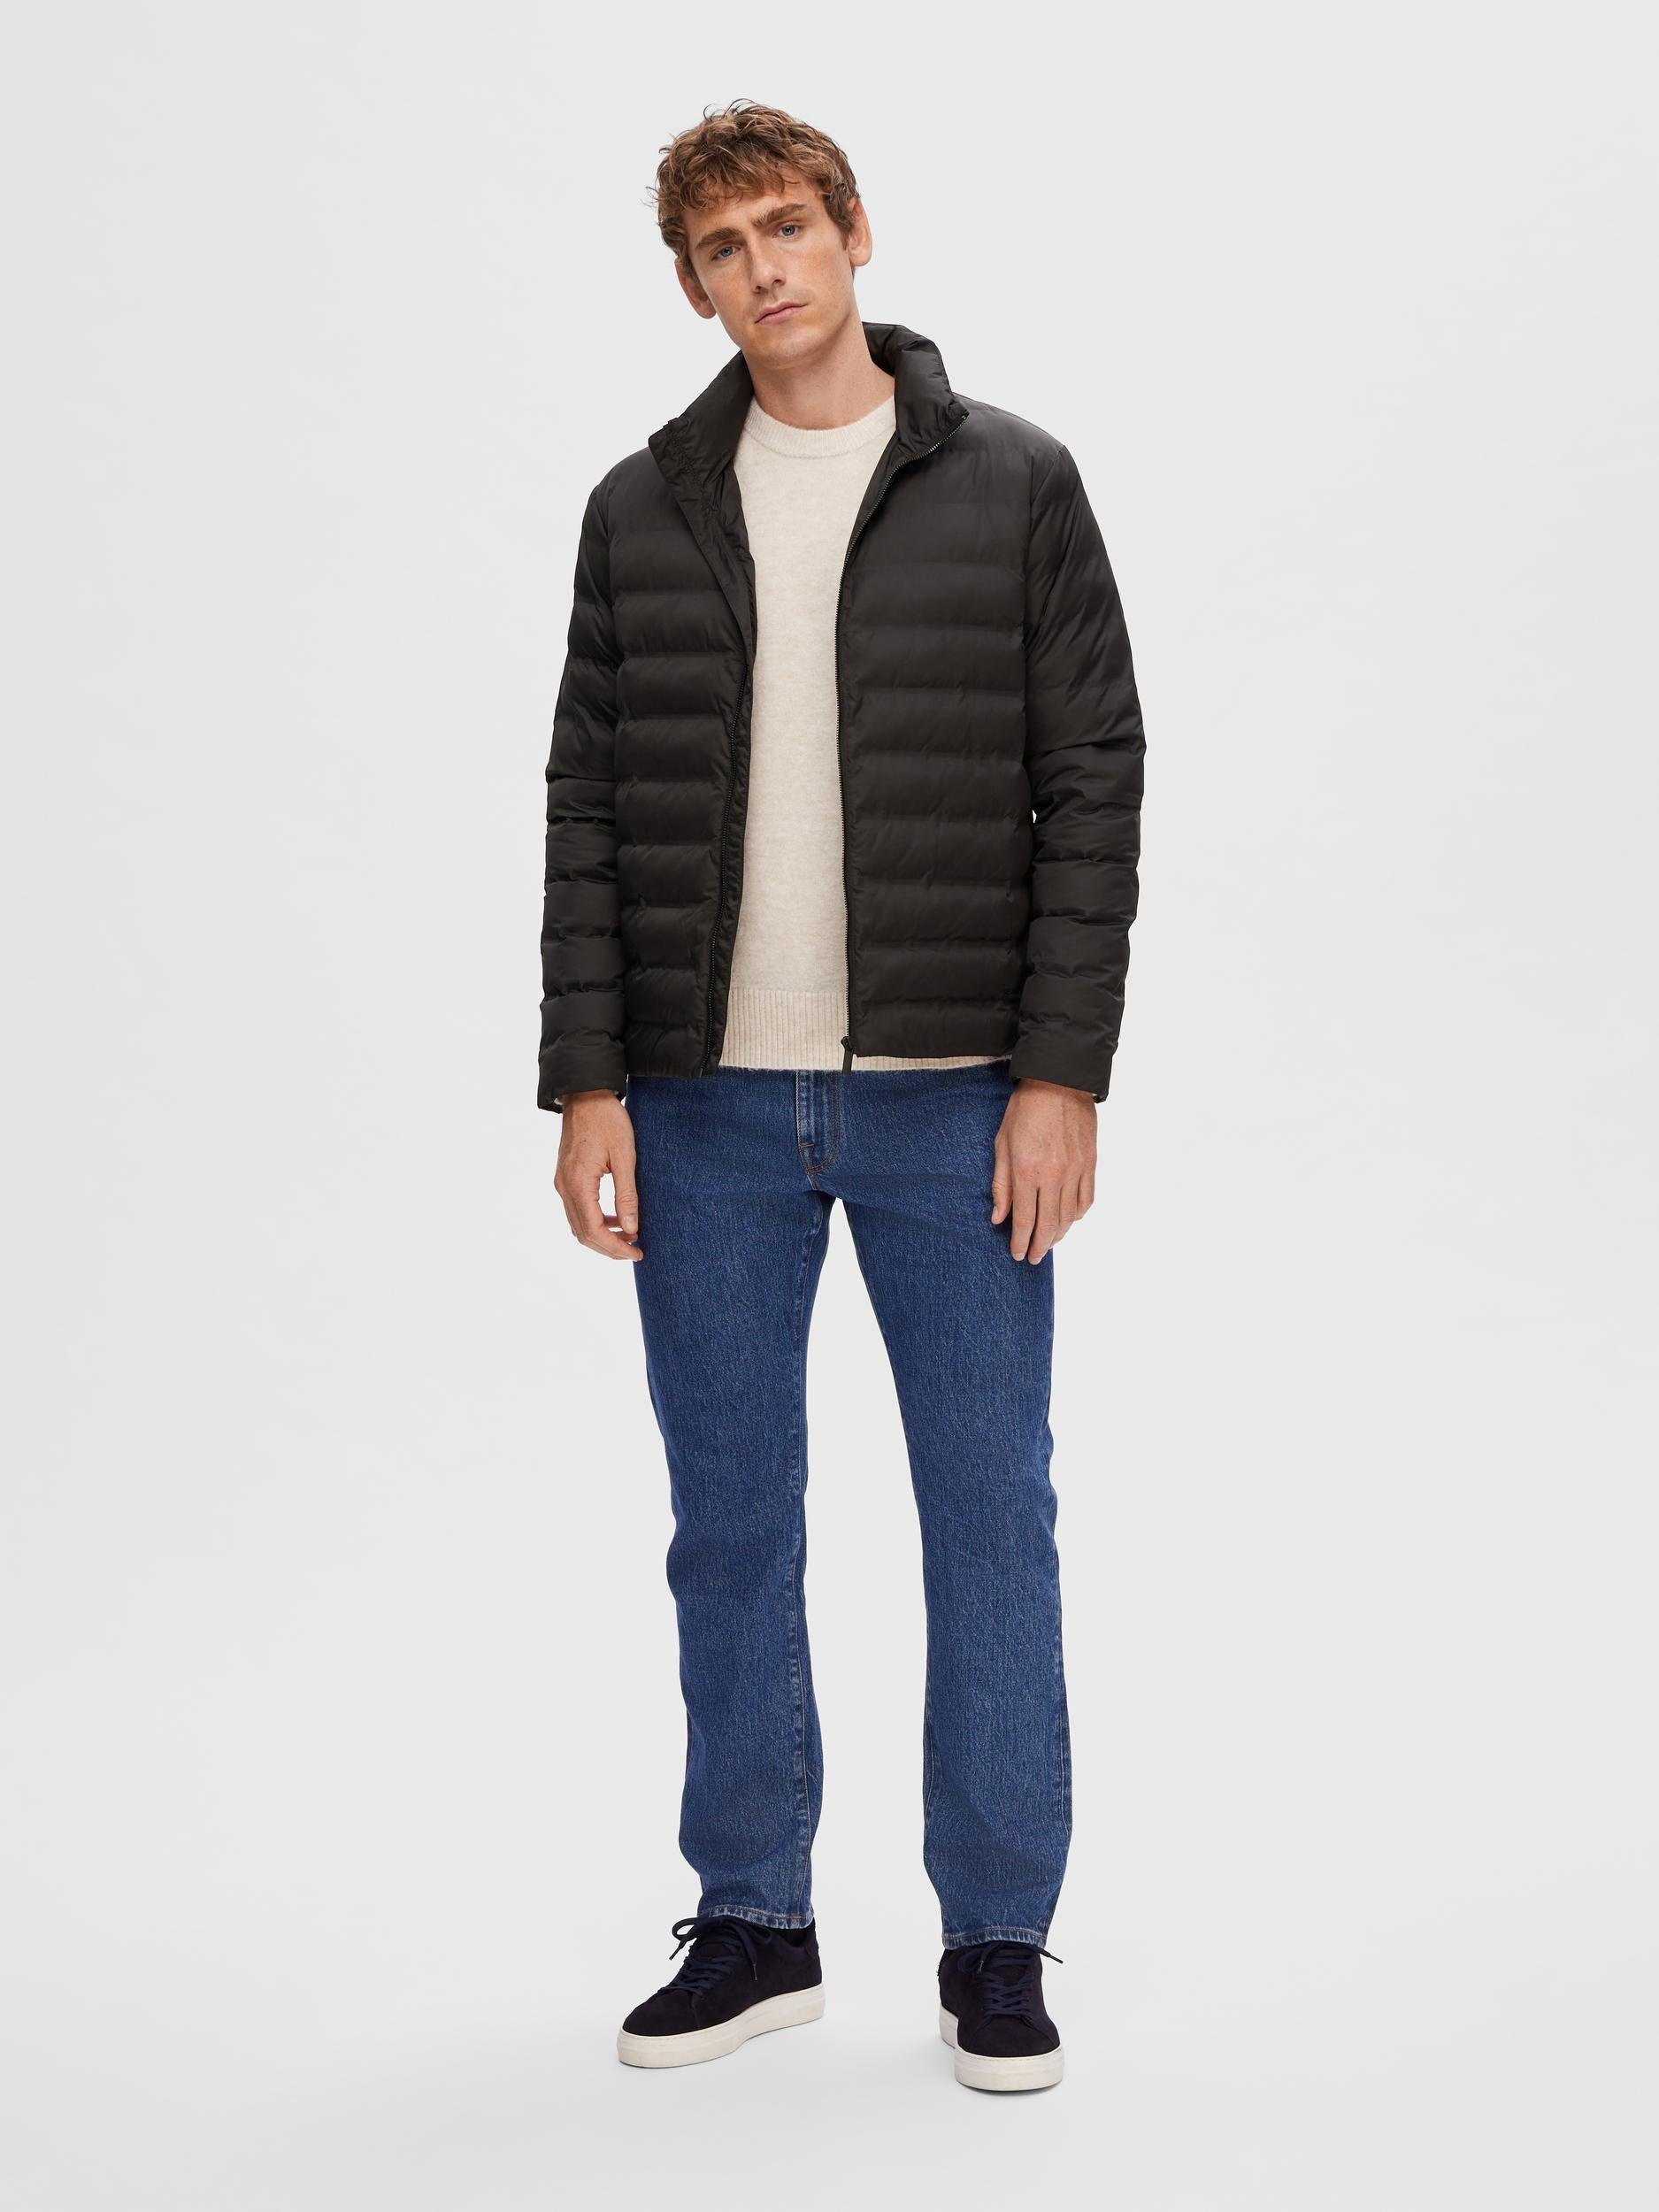 SLHBARRY Stretch JACKET Steppjacke SELECTED QUILTED NOOS HOMME Limo